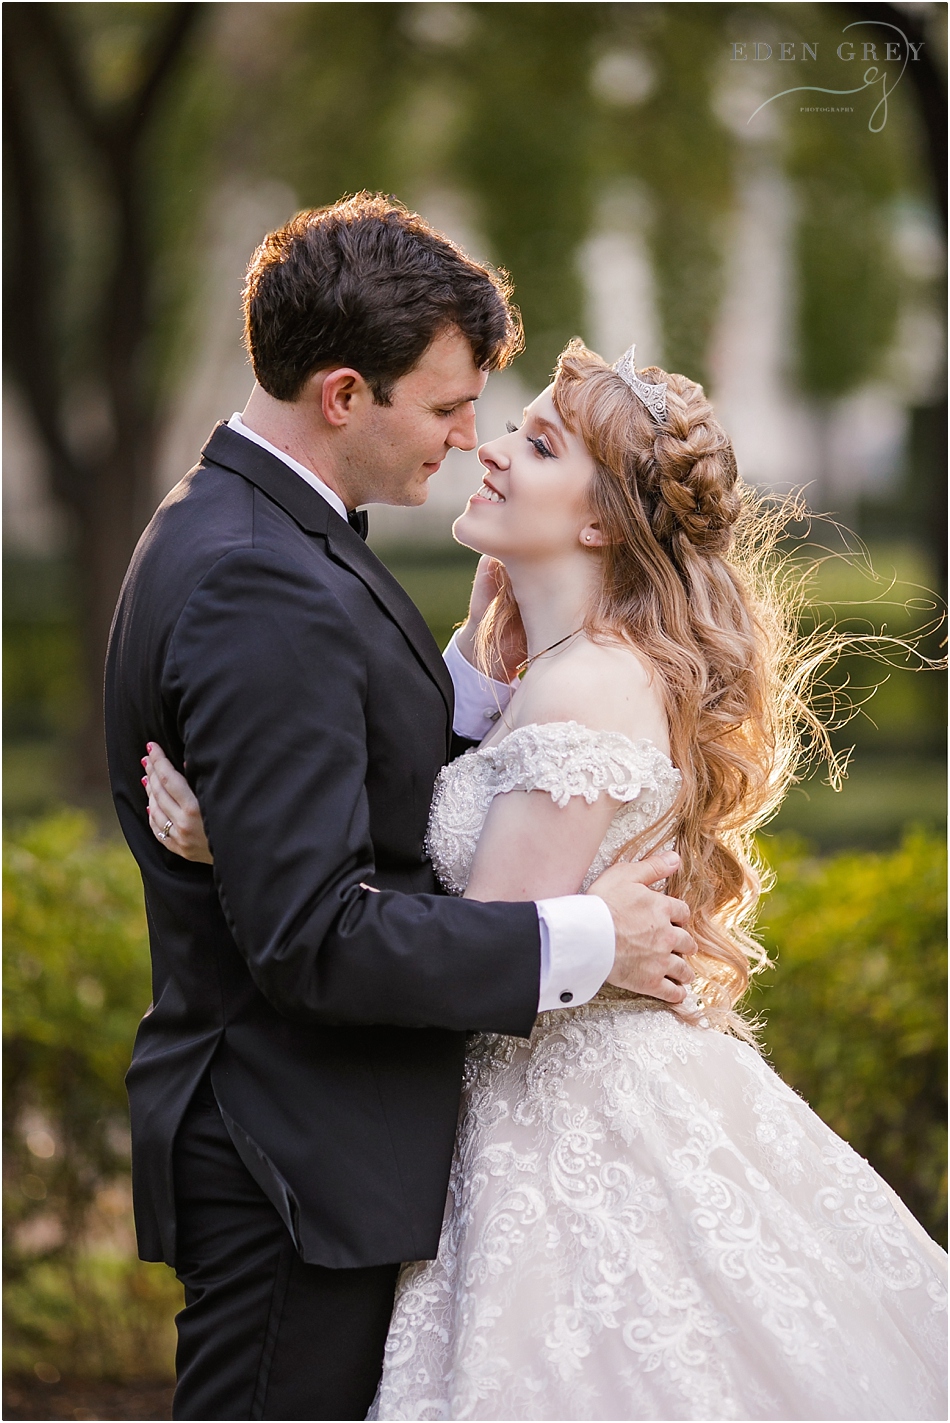 Classic and Top Wedding Photographers in Houston